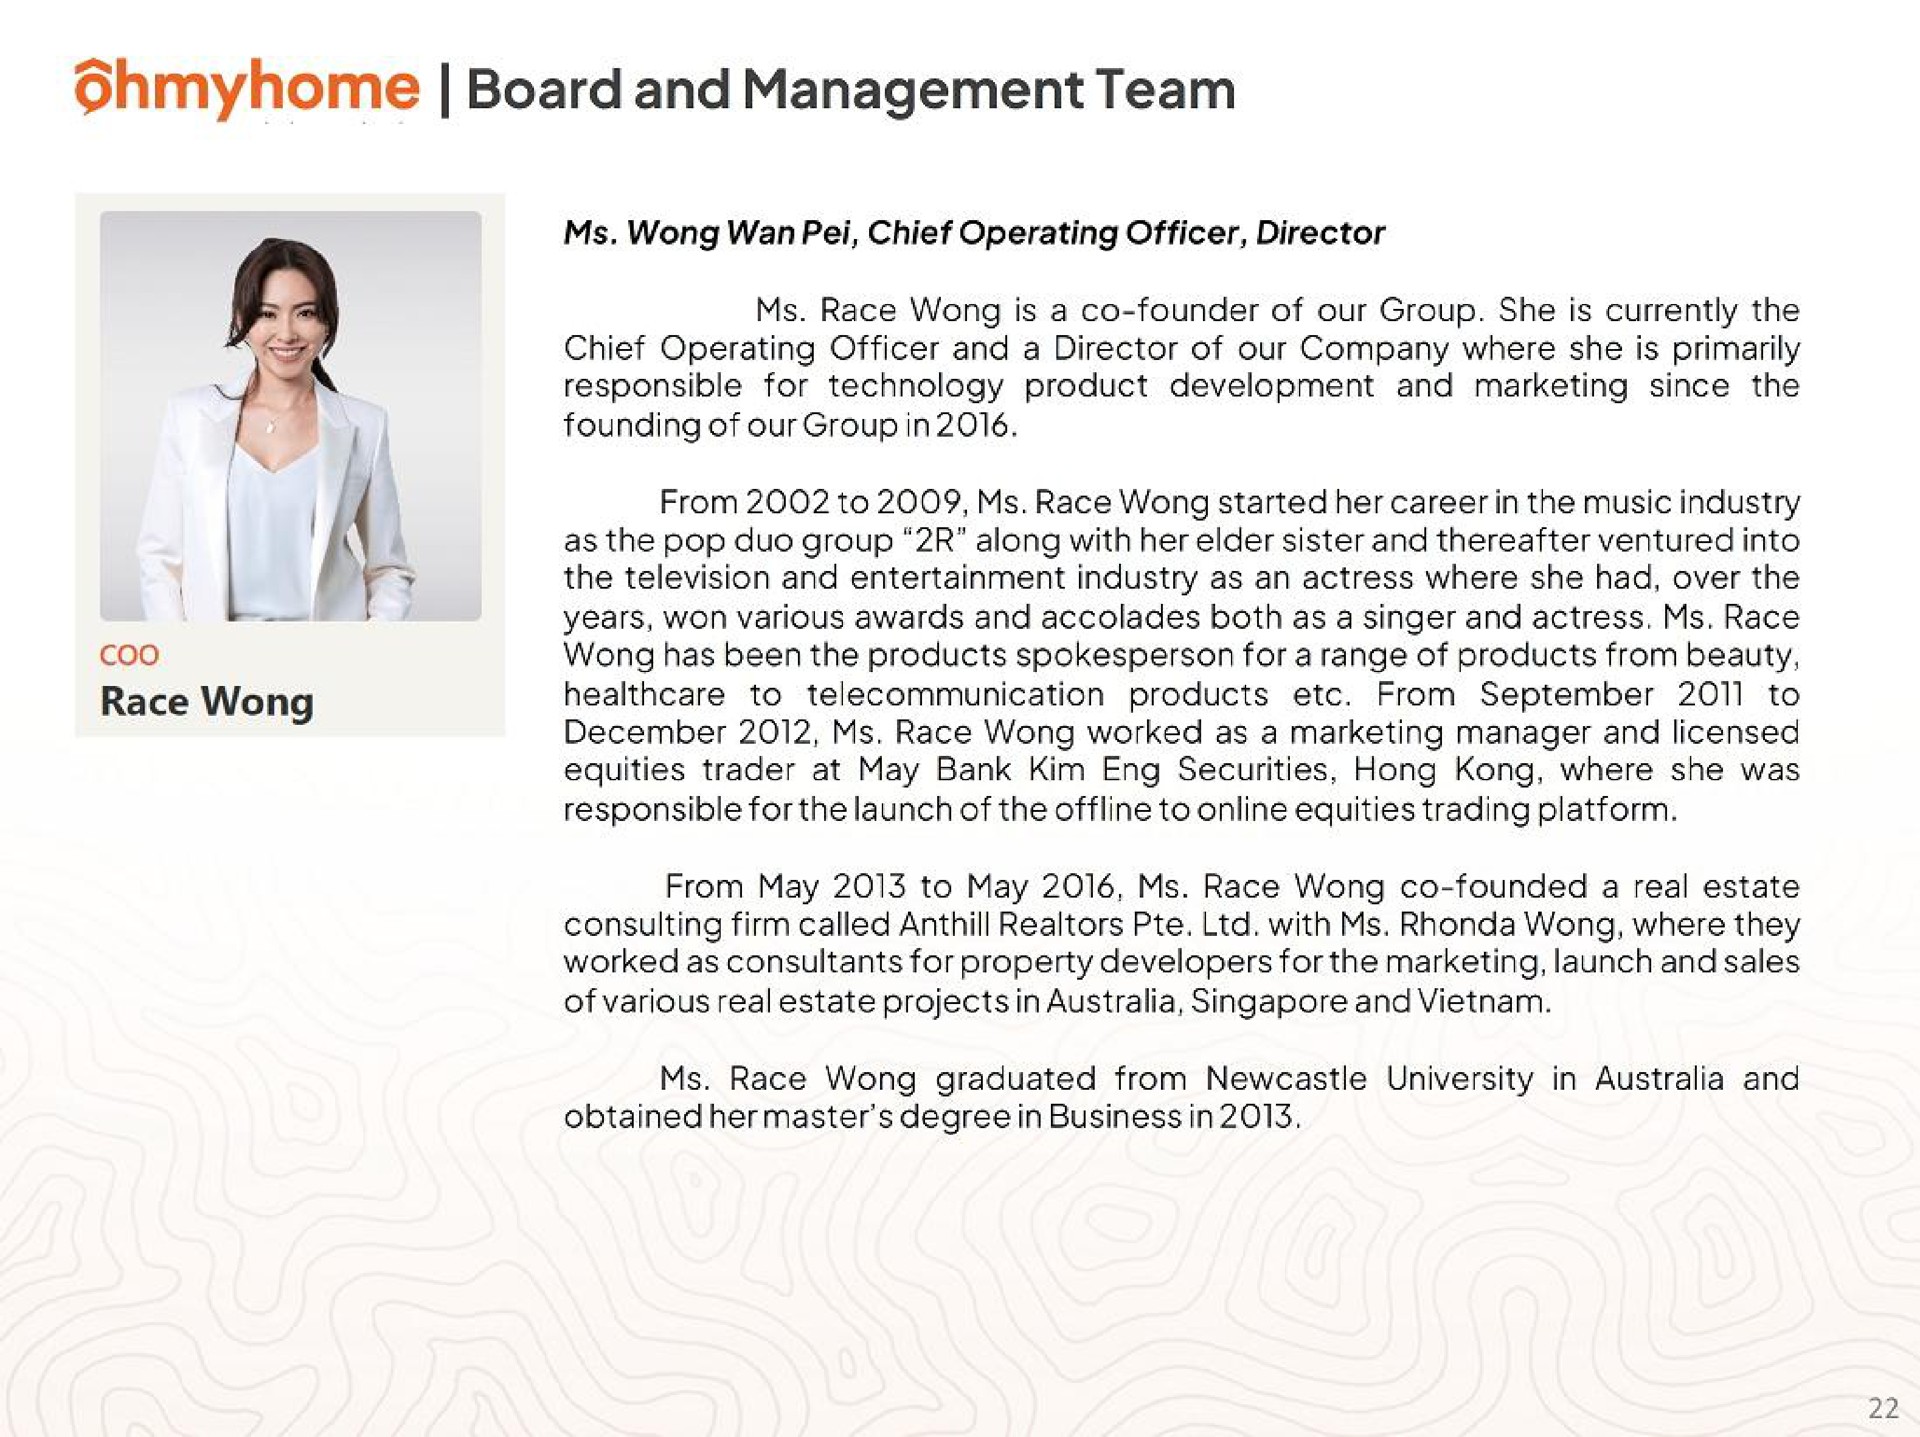 board and management team coo race wong | Ohmyhome